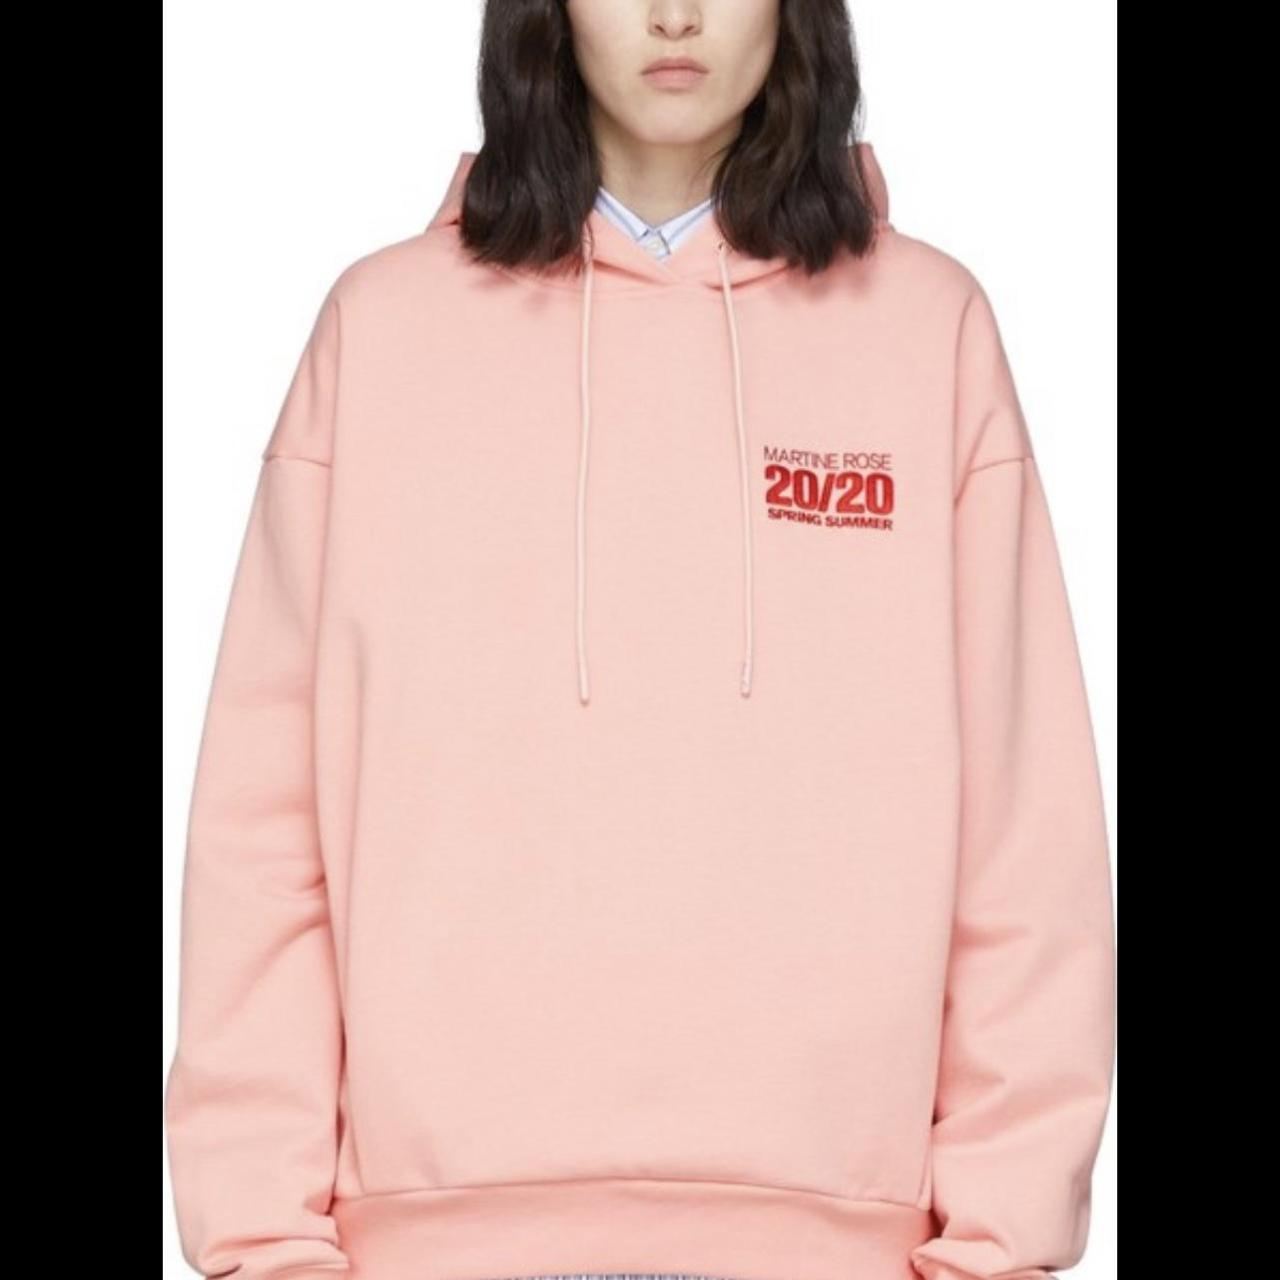 Product Image 1 - Martine Rose Hoodie. Size S.